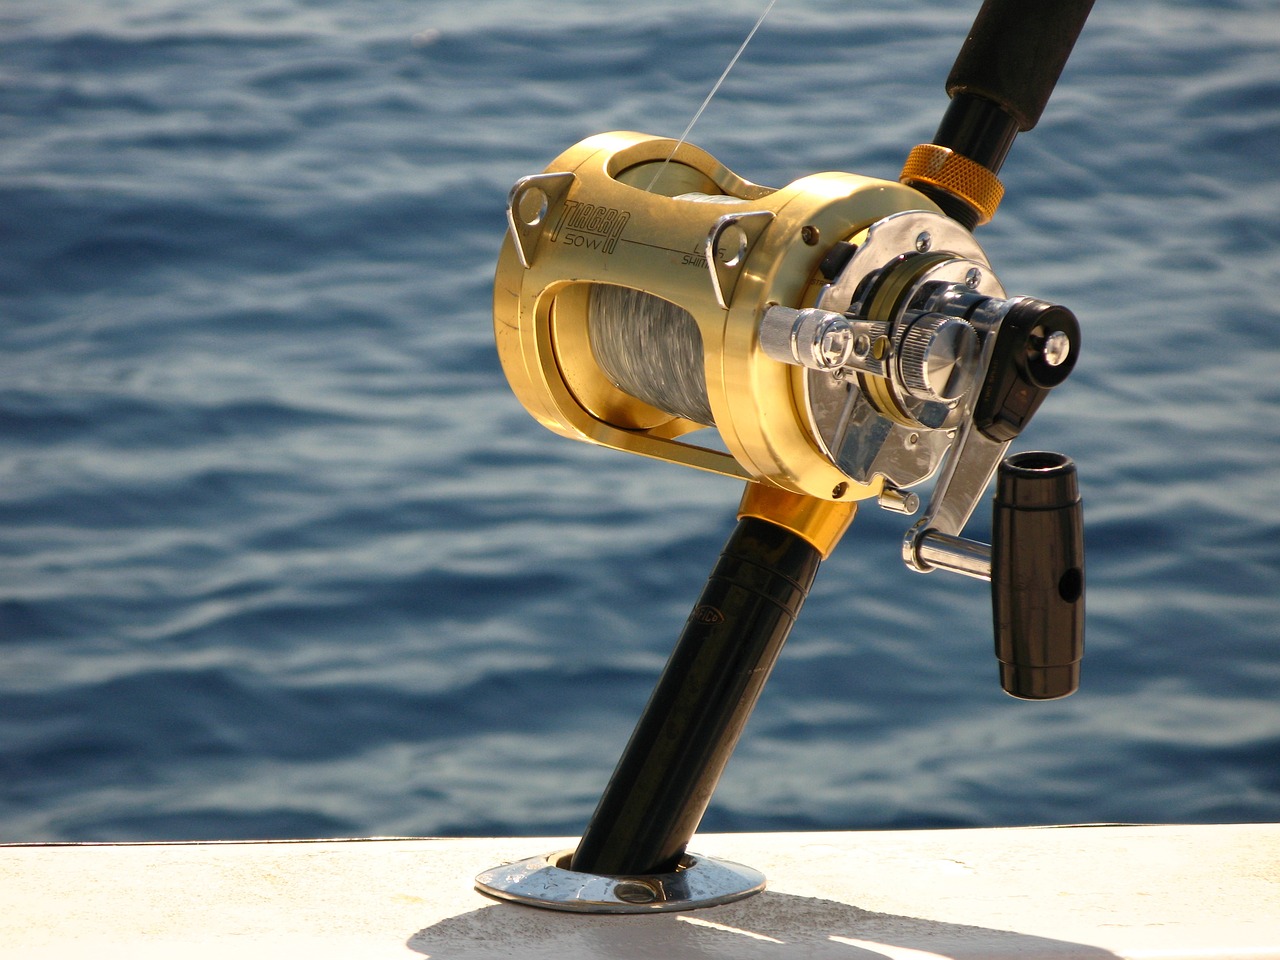 The Ultimate Guide to Choosing the Best Surf Fishing Reels